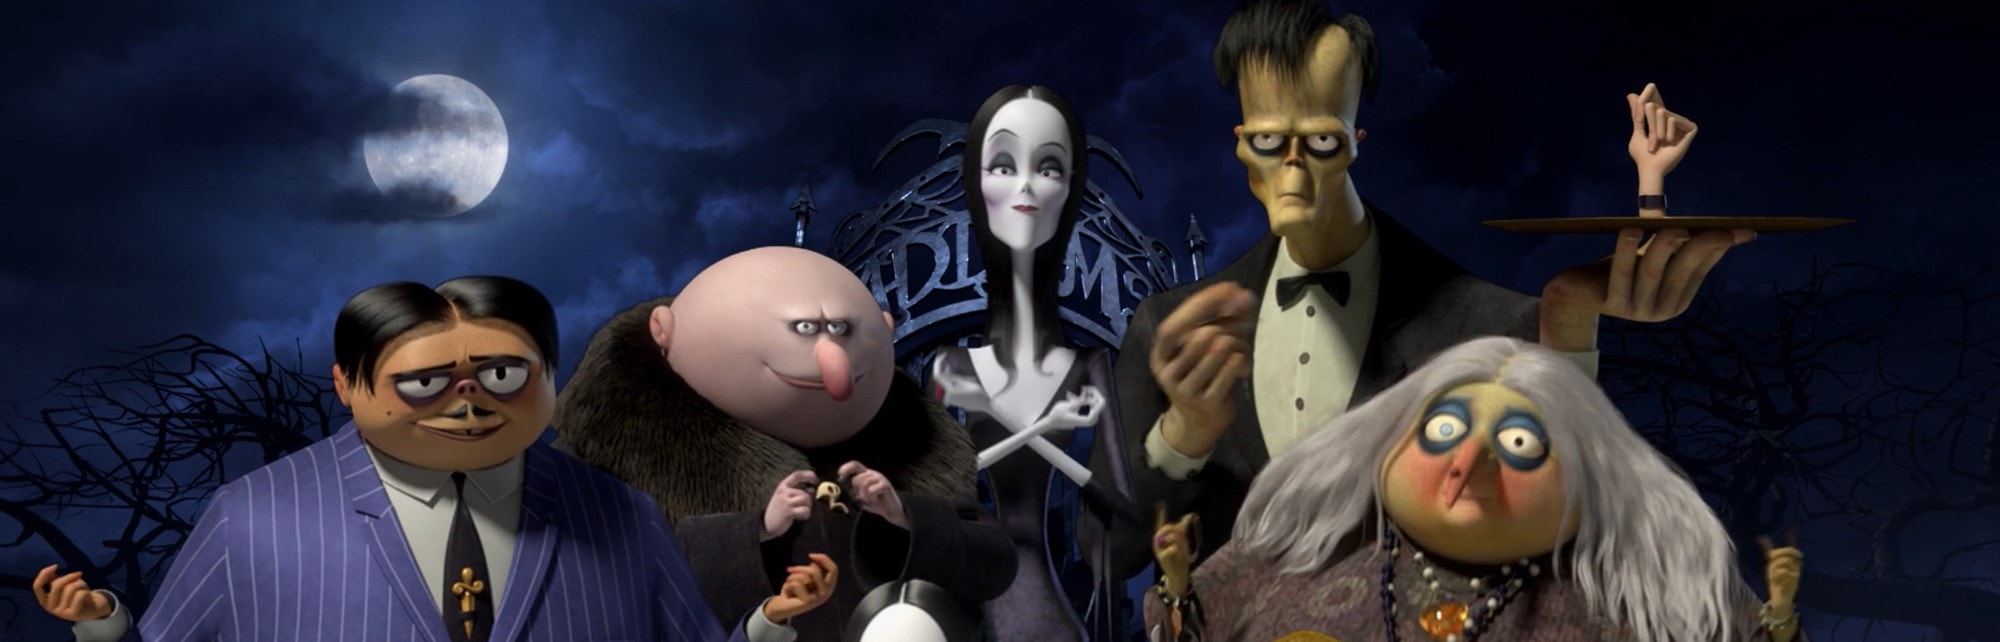 The Addams Family will be released into UK cinemas on October 25th. | HMV  Store